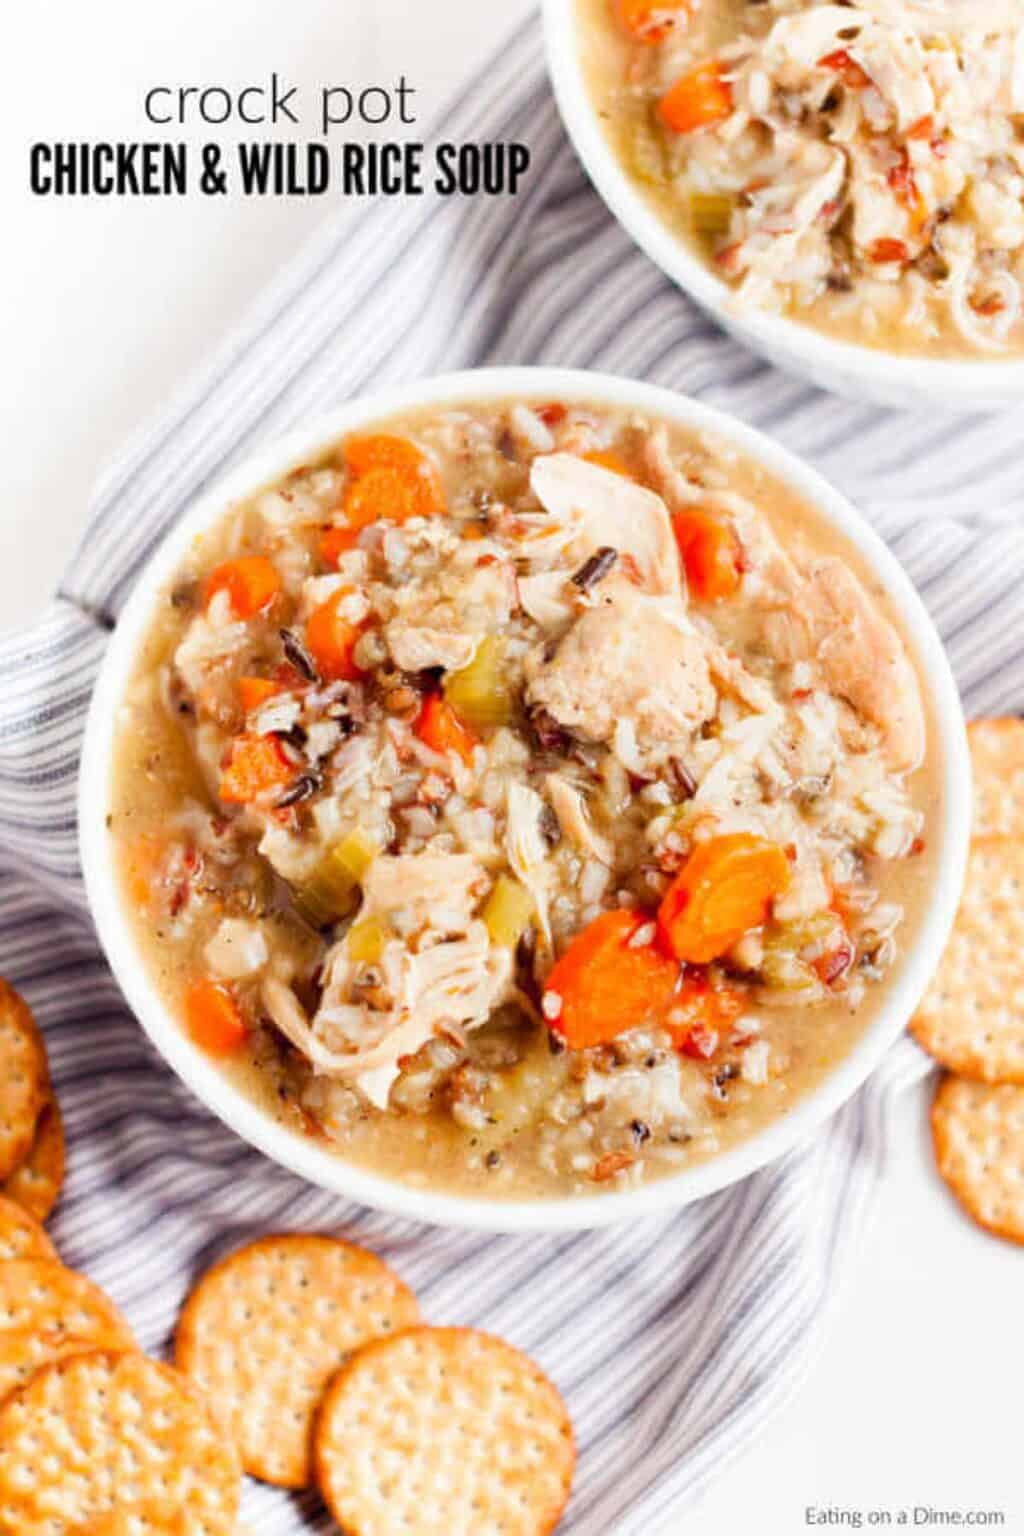 Crockpot chicken wild rice soup - easy toss and go meal